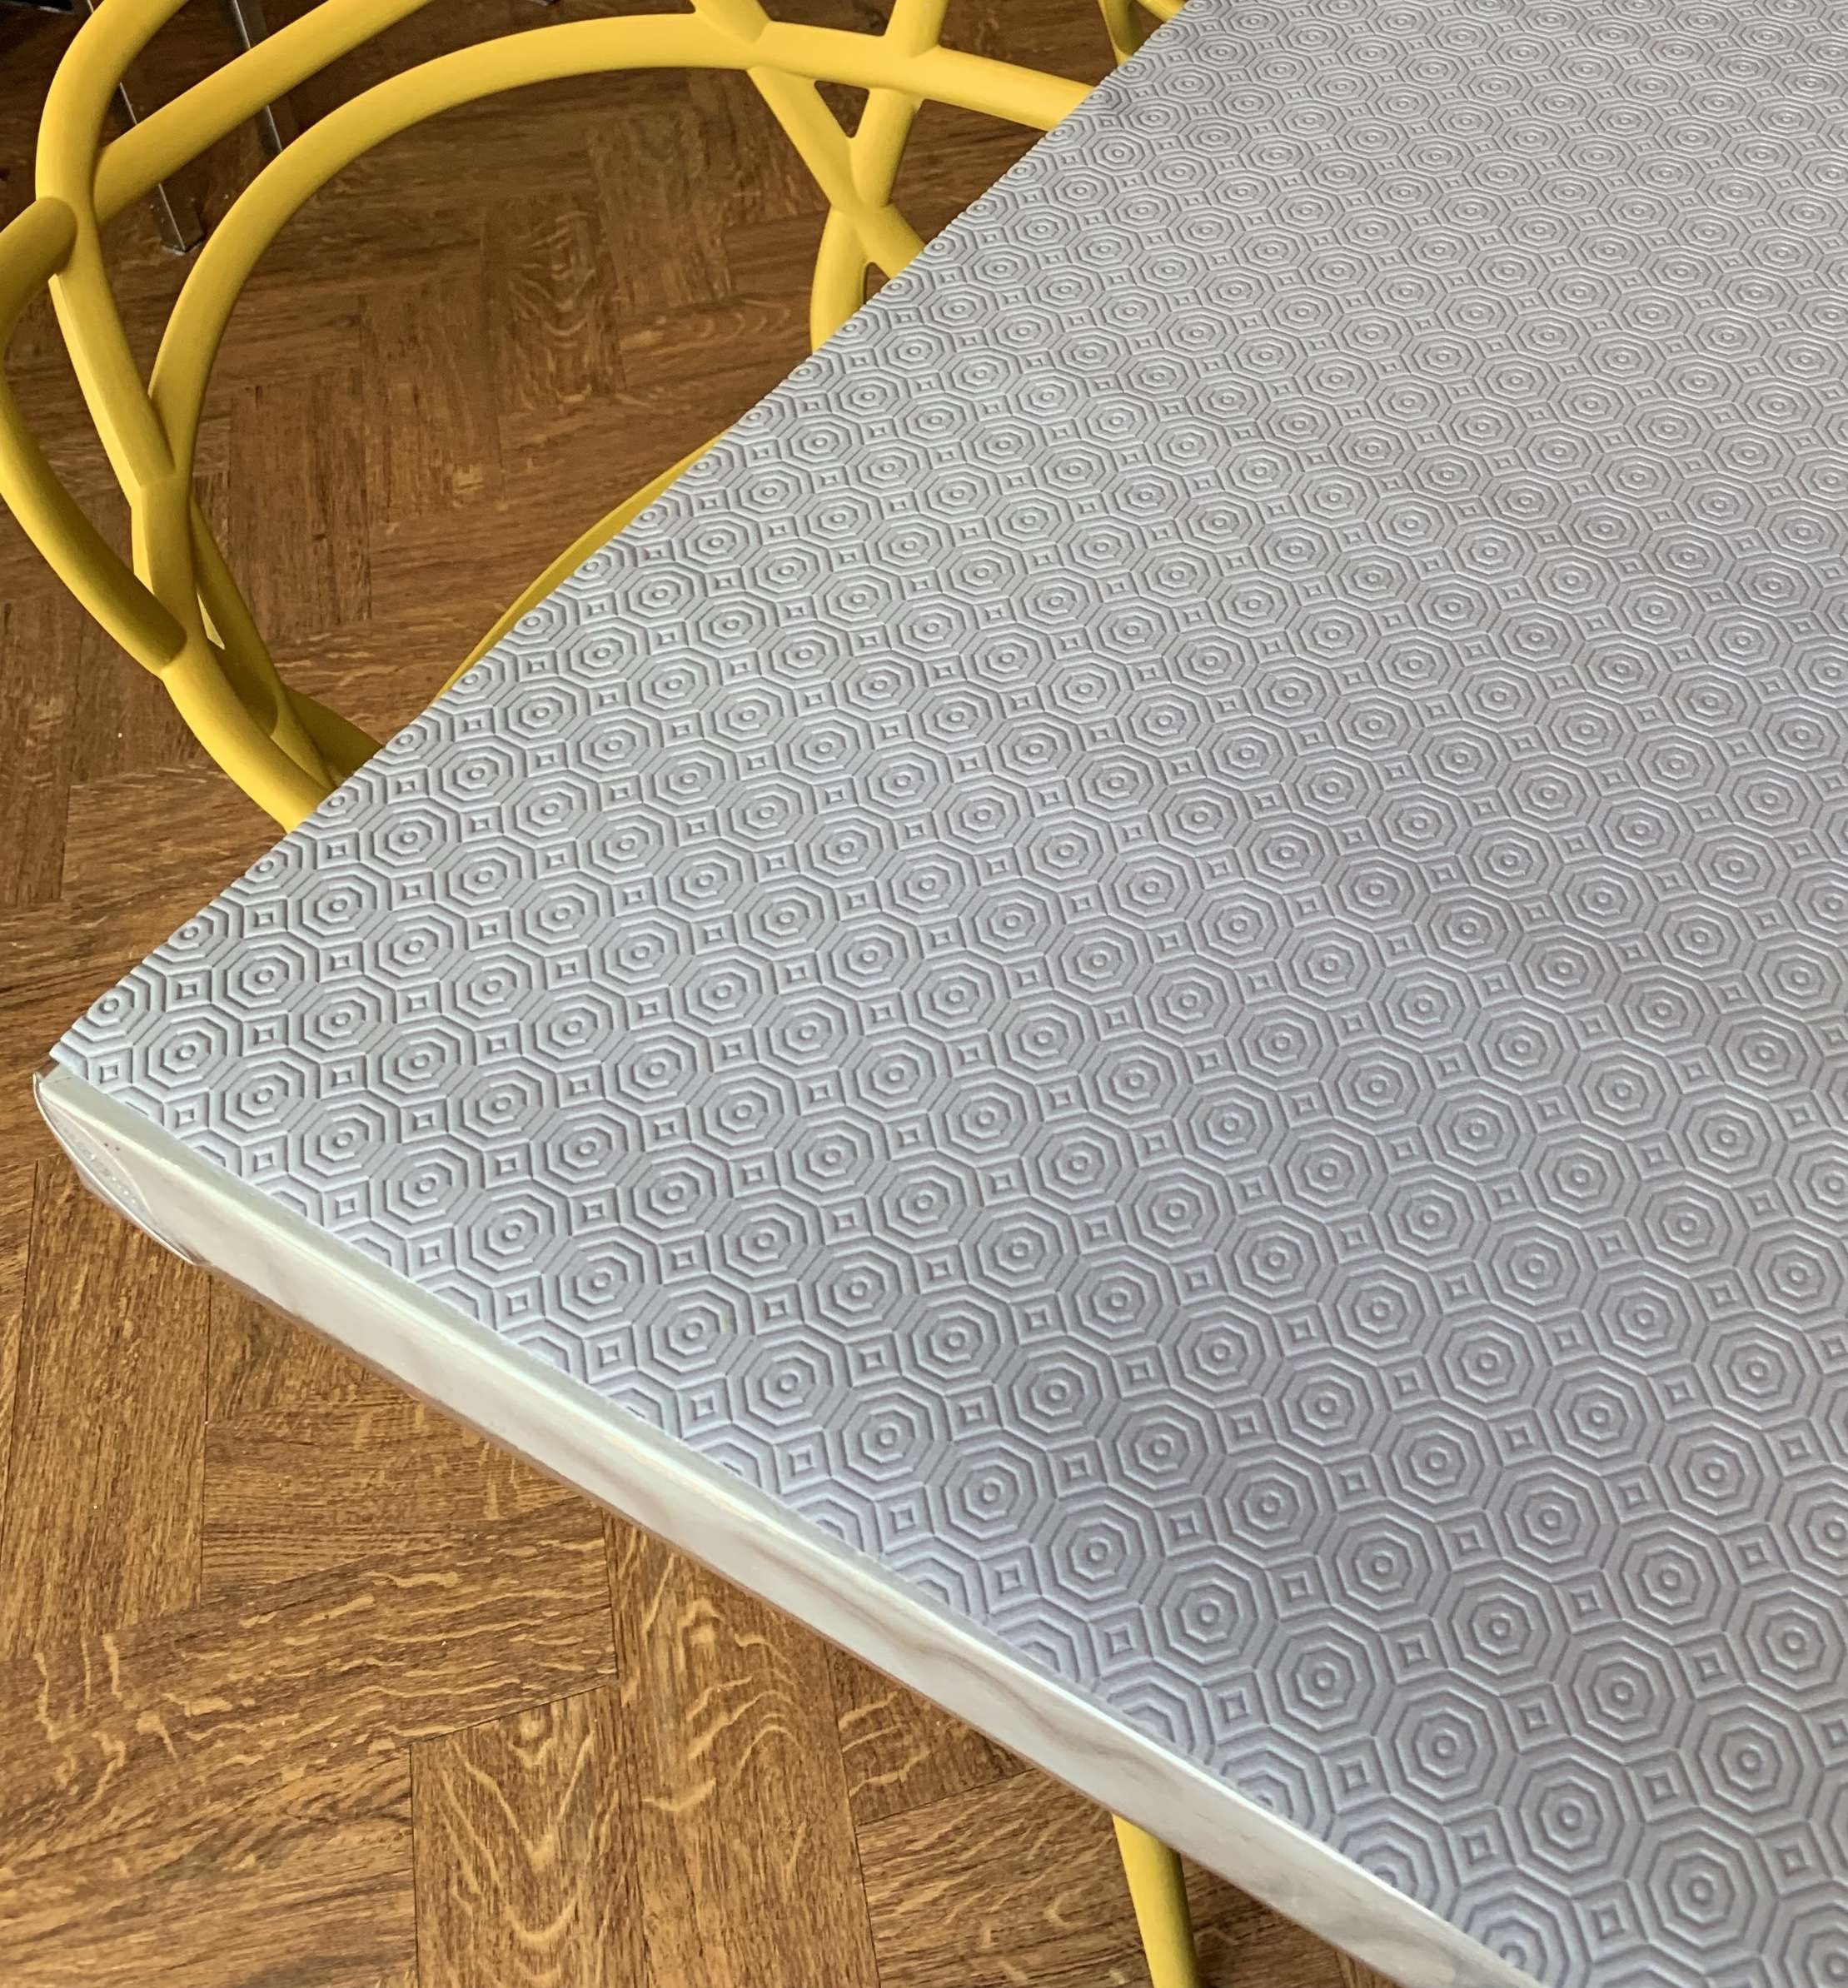 1.5MM Extra Thick Placemats Extra Large Silicone Mat 28 x 20 Heat  Resistant Mat for Kitchen Countertop Protector, Washable Place Mats  Silicone Mats